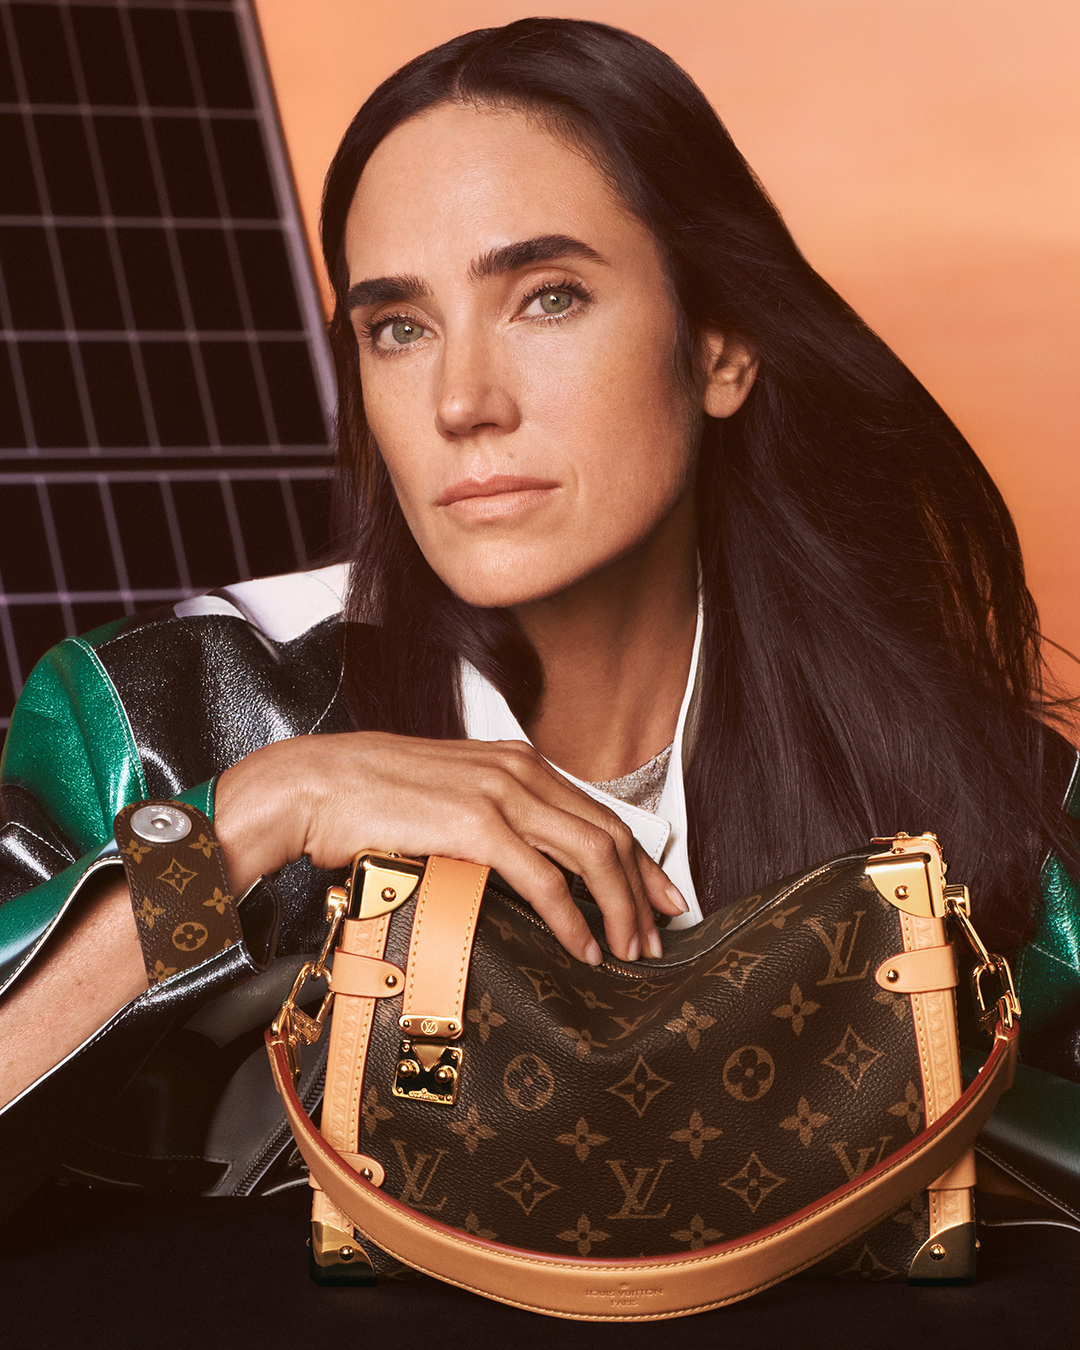 Louis Vuitton 'By the Pool' Summer 2023 Ad Campaign Review